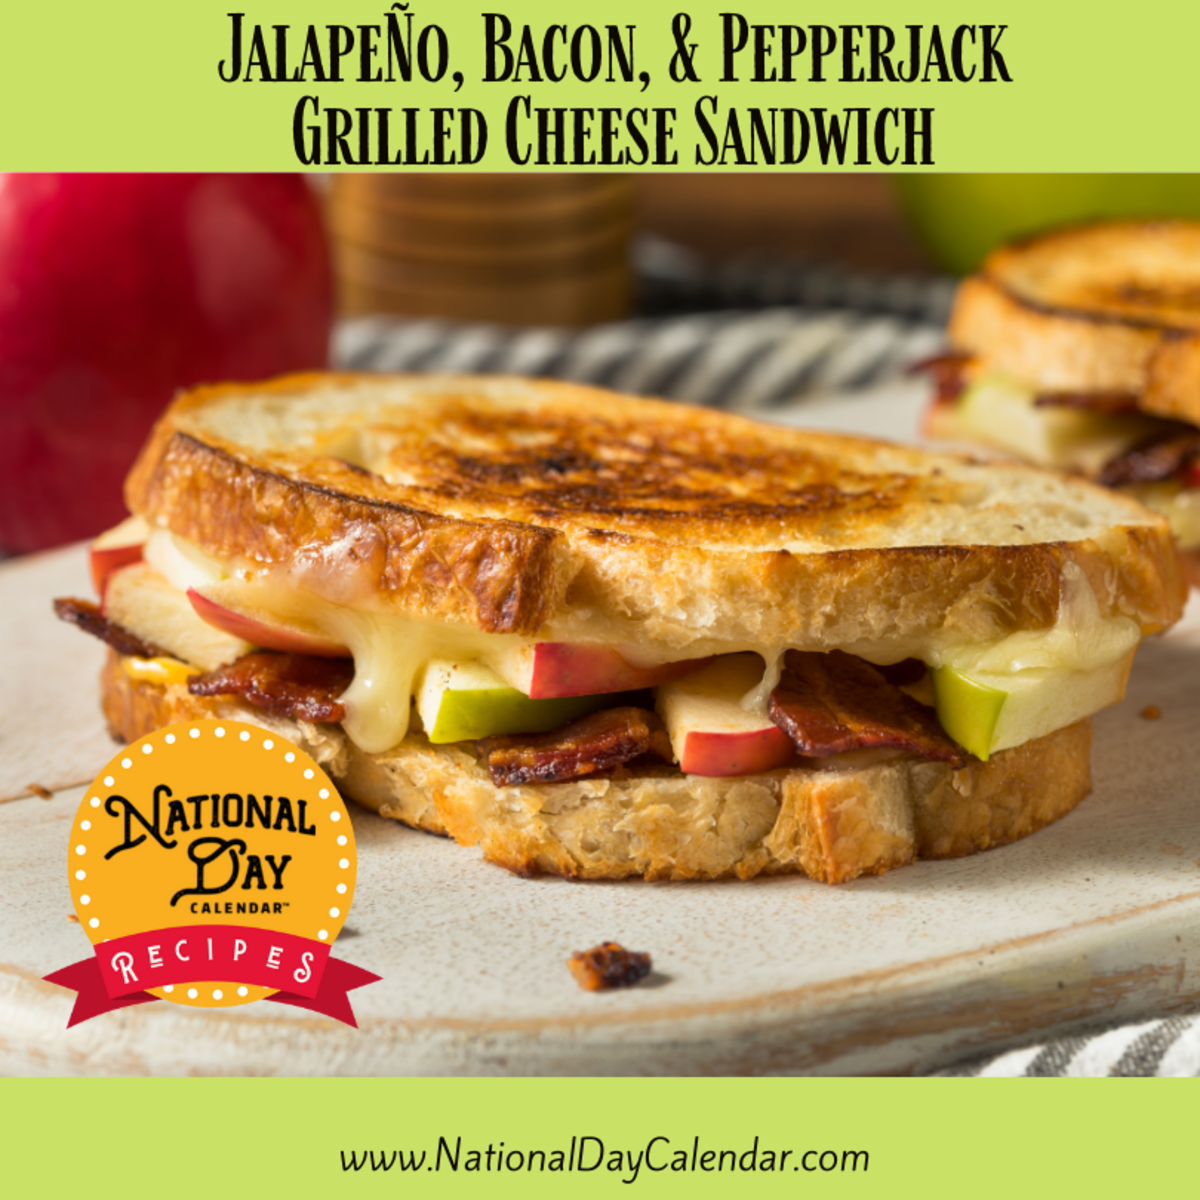 Jalapeno, Bacon & Pepper Jack Grilled Cheese Sandwich